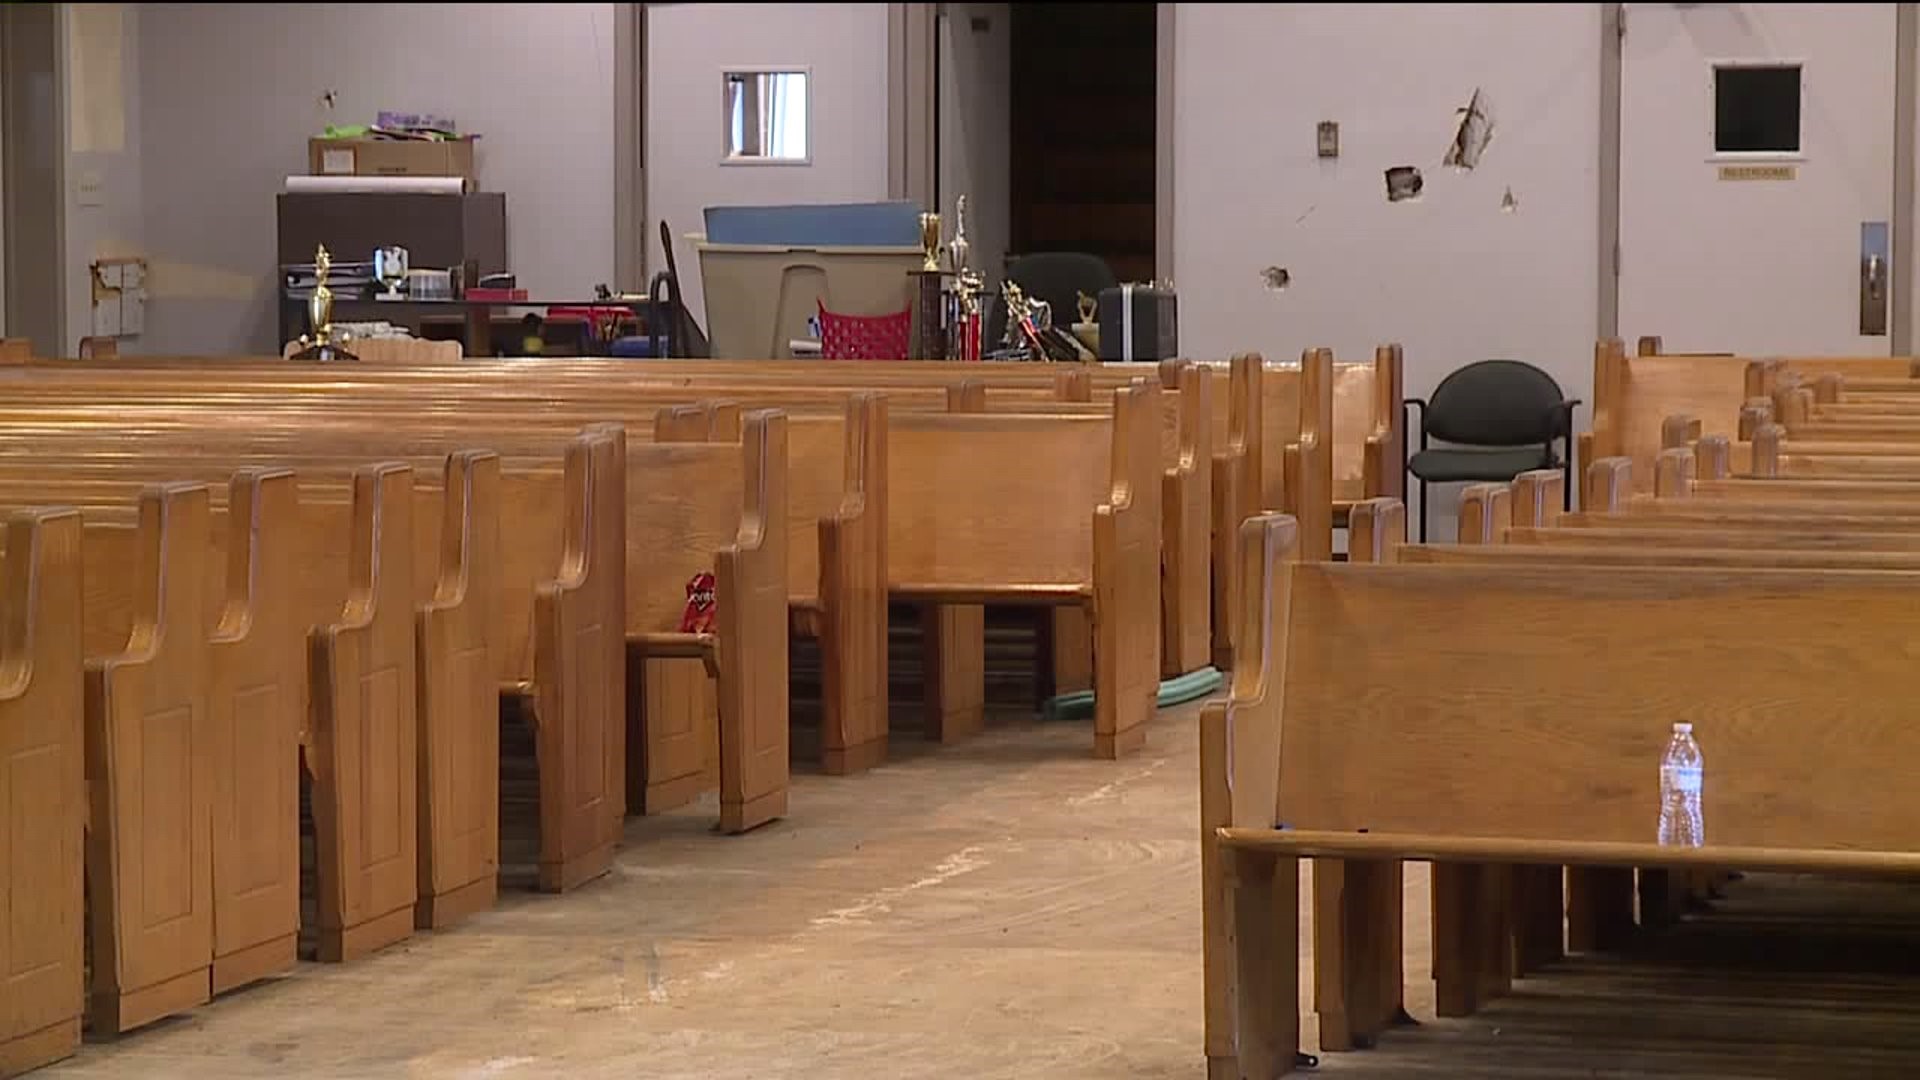 "It Looked Like a Tornado Came Through Here," Church Vandalized in Lycoming County